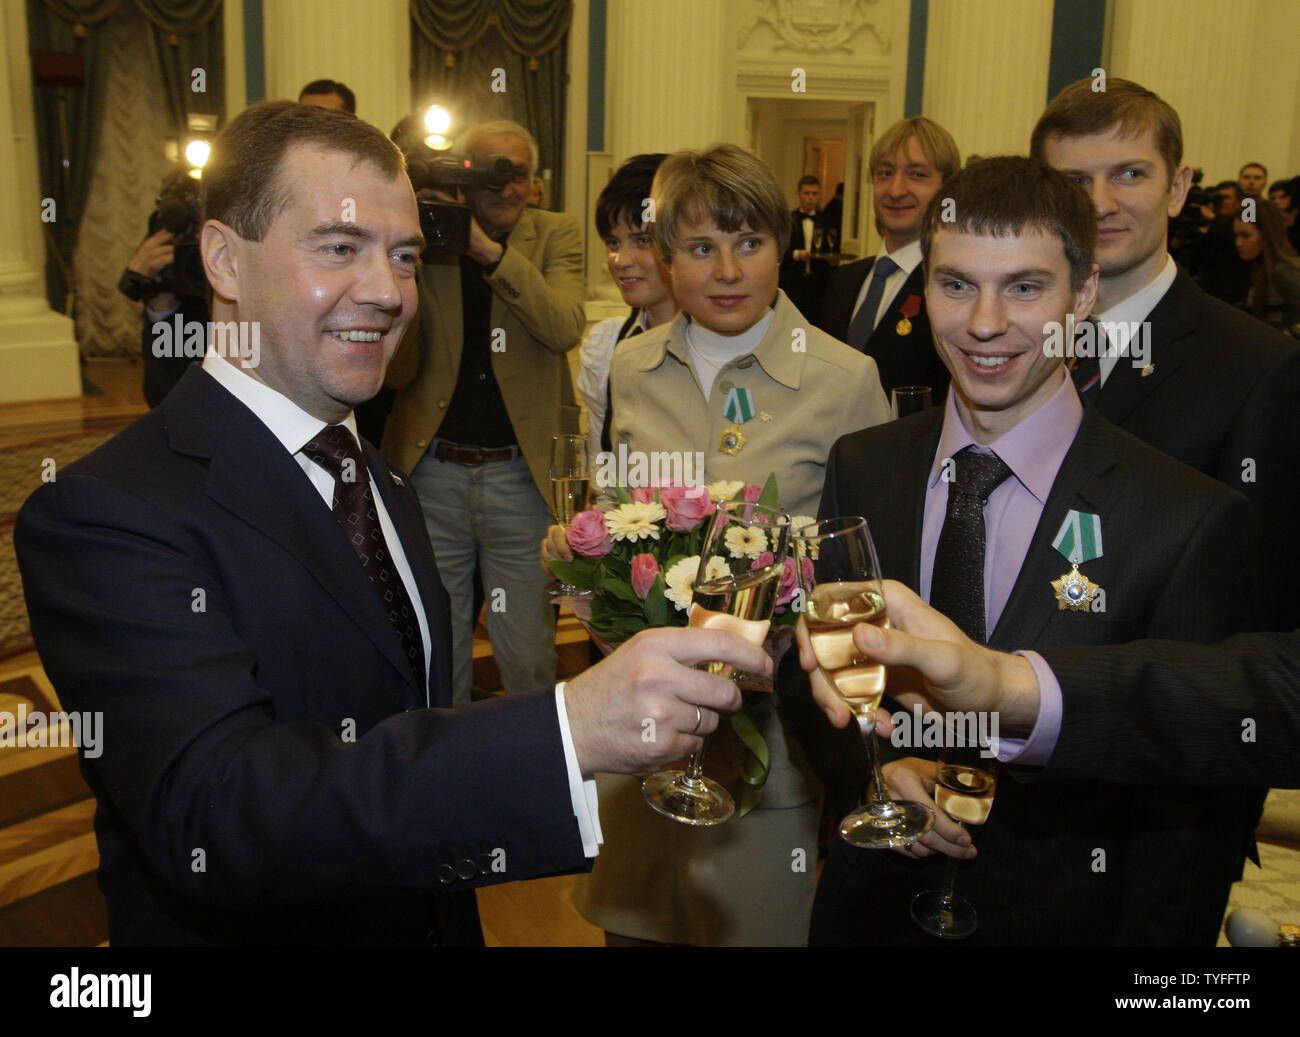 Russian President Dmitry Medvedev (L) toasts with national athletes who won medals at Winter Olympic Games in Vancouver during a reception in the Kremlin in Moscow on March 15, 2010. UPI/Alex Natin Stock Photo